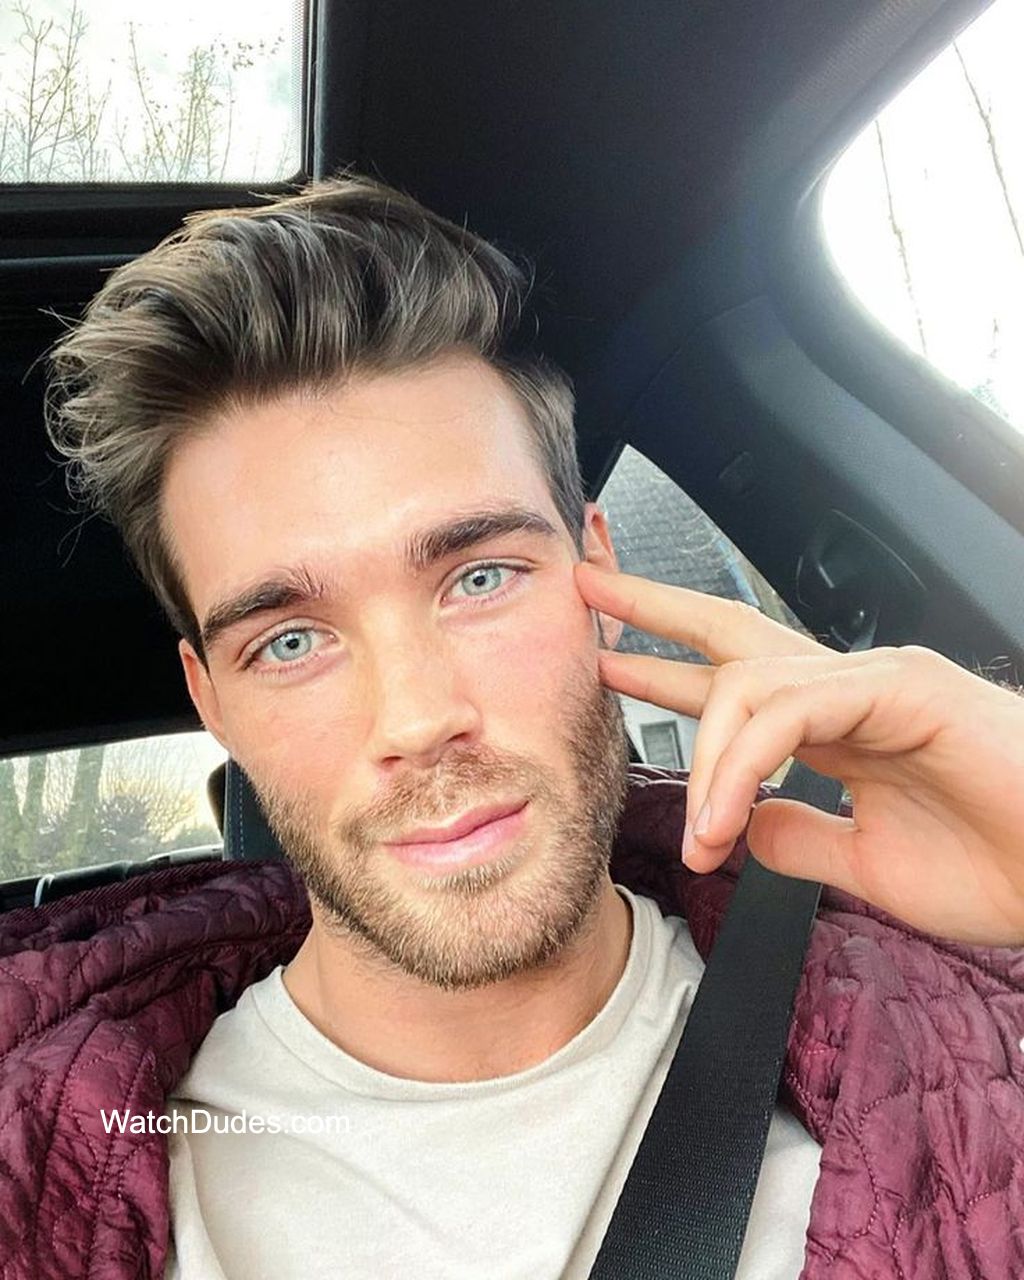 The 25 Hottest Guys To Follow on Instagram